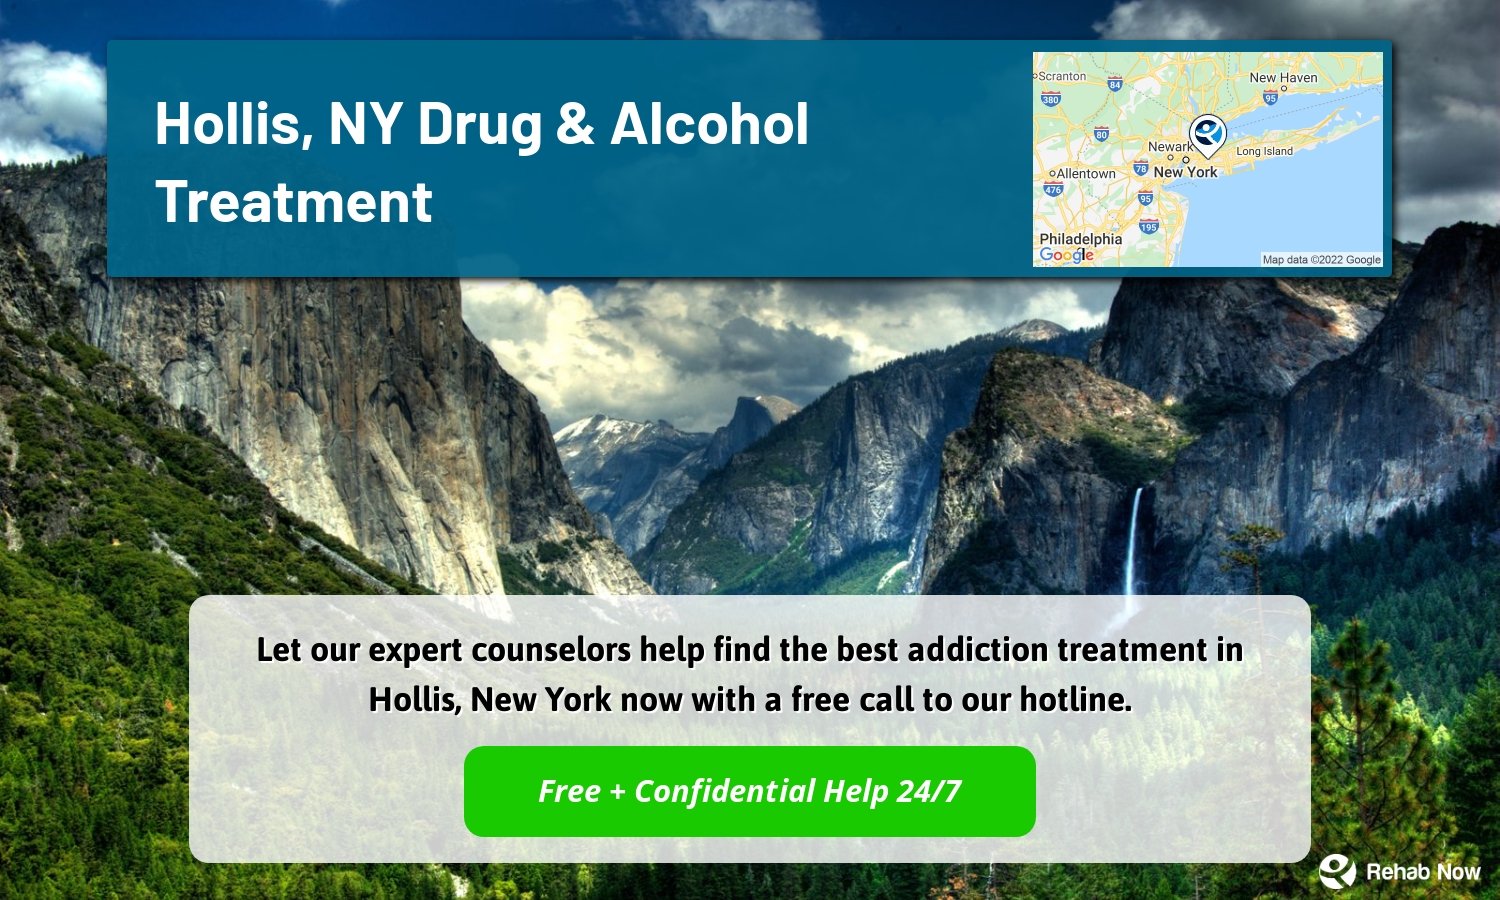 Let our expert counselors help find the best addiction treatment in Hollis, New York now with a free call to our hotline.